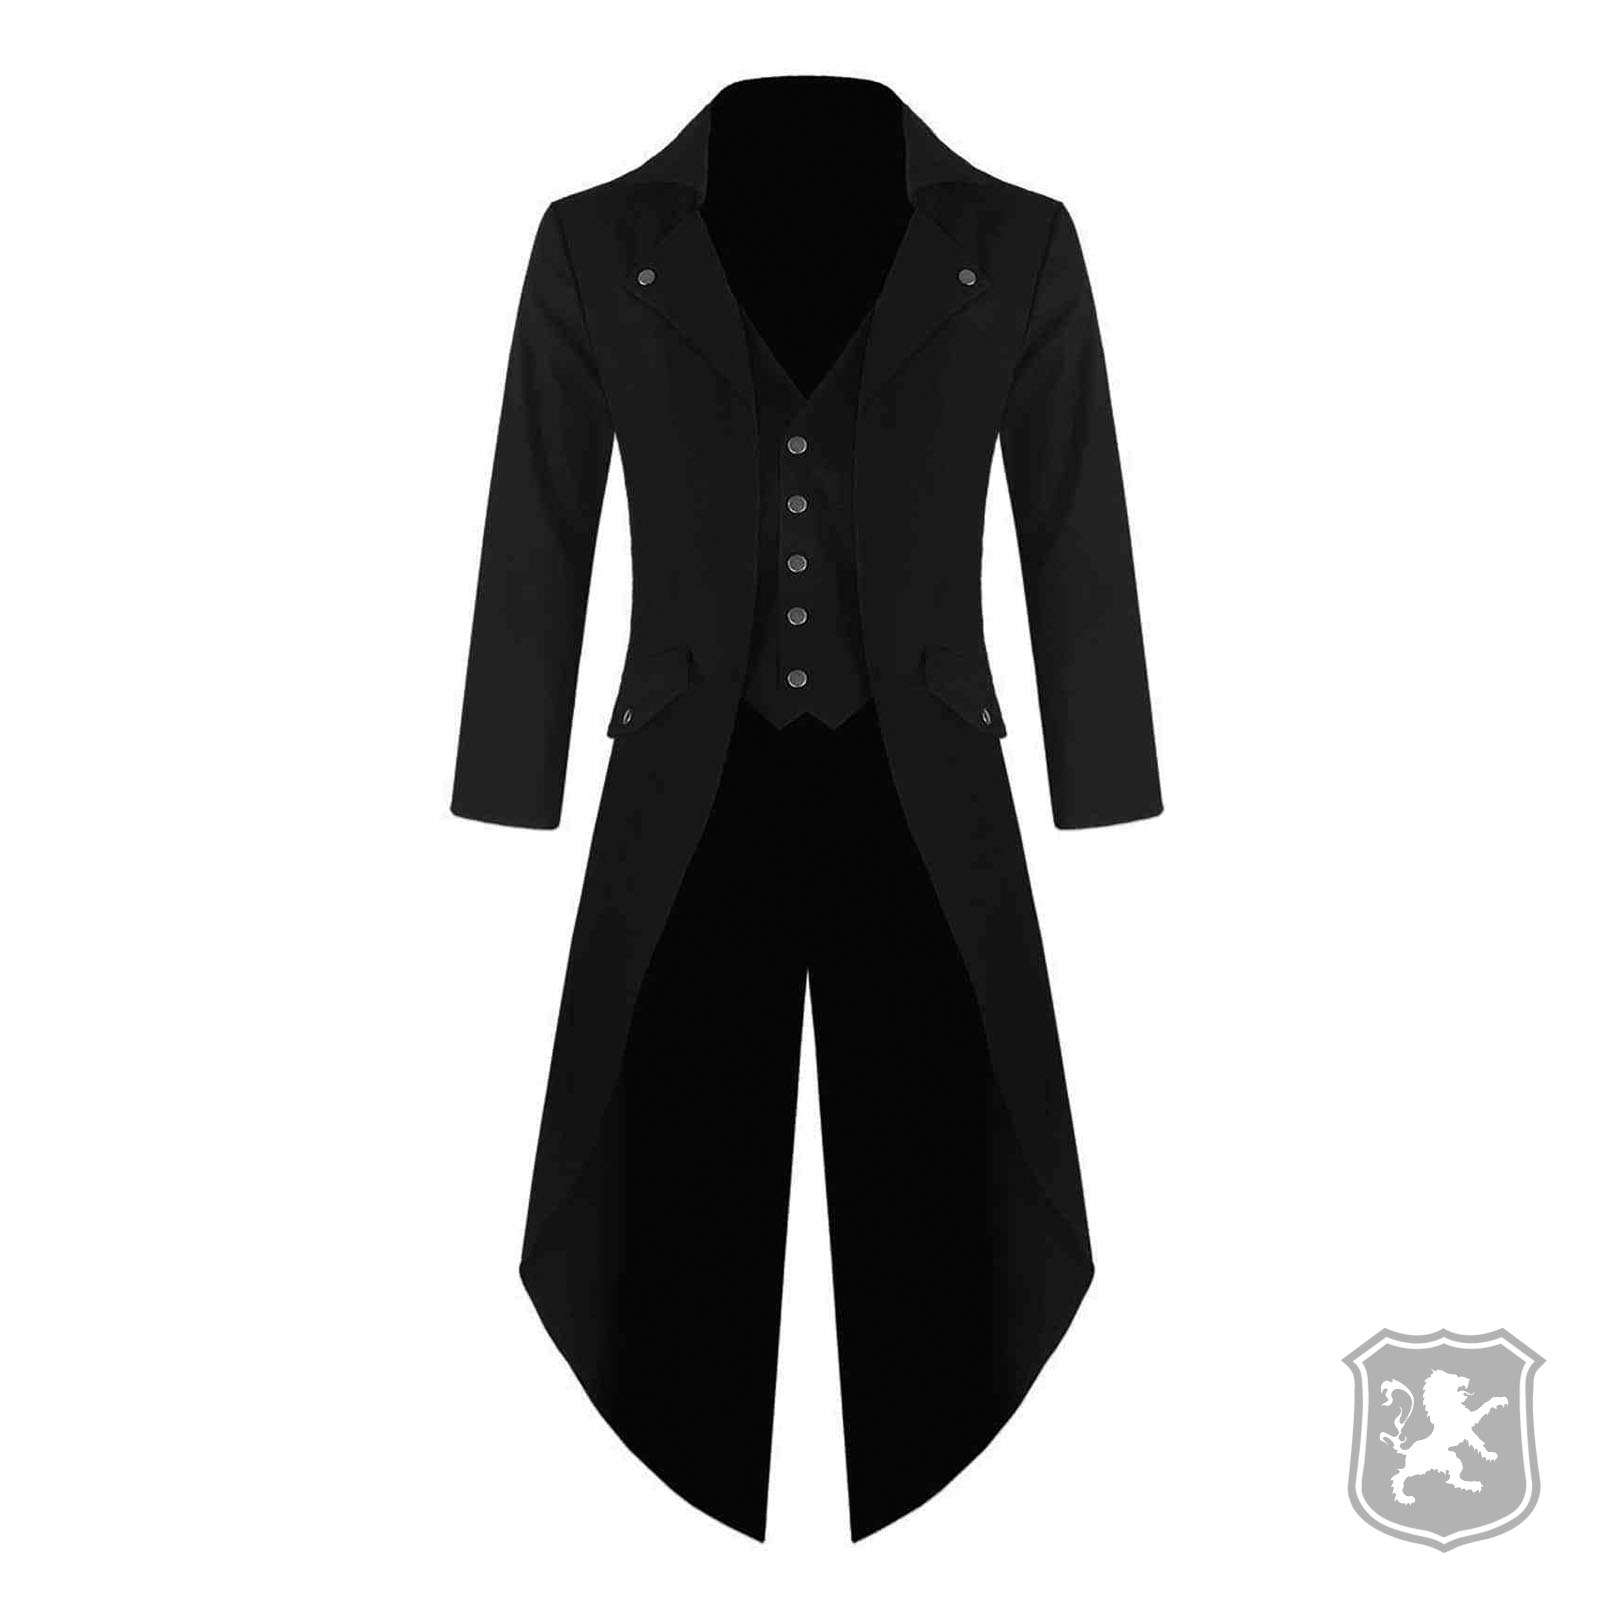 Purple Mens Steampunk Tailcoat Jacket Gothic Victorian Frock Coat